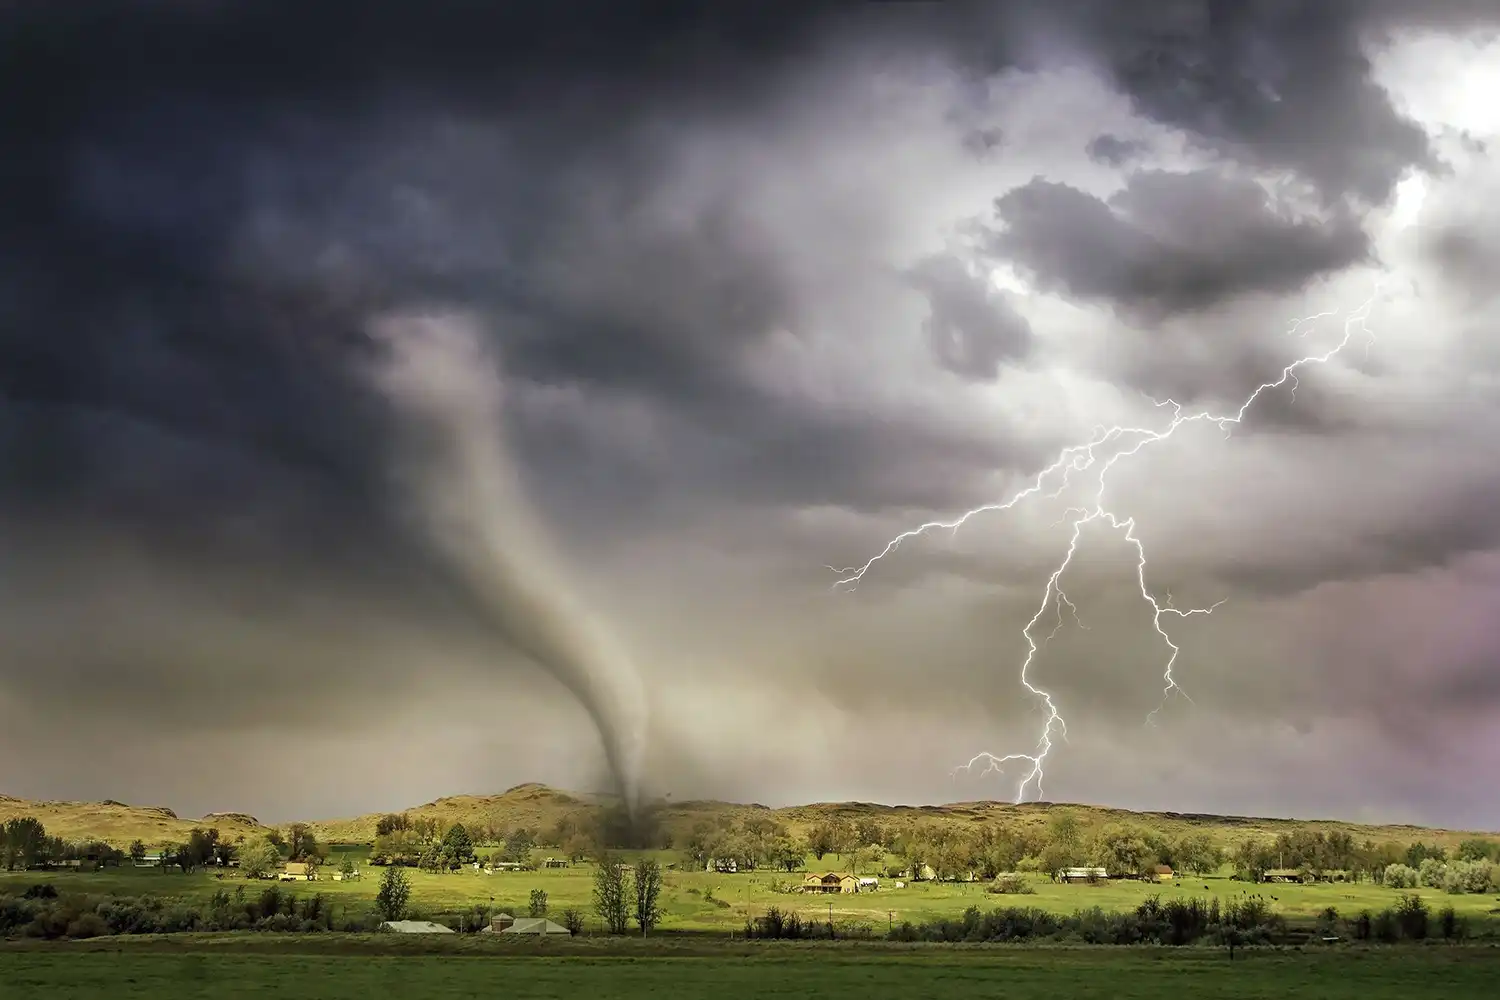 A photograph of a green landscape featuring both a tornado and lightening in the sky above.